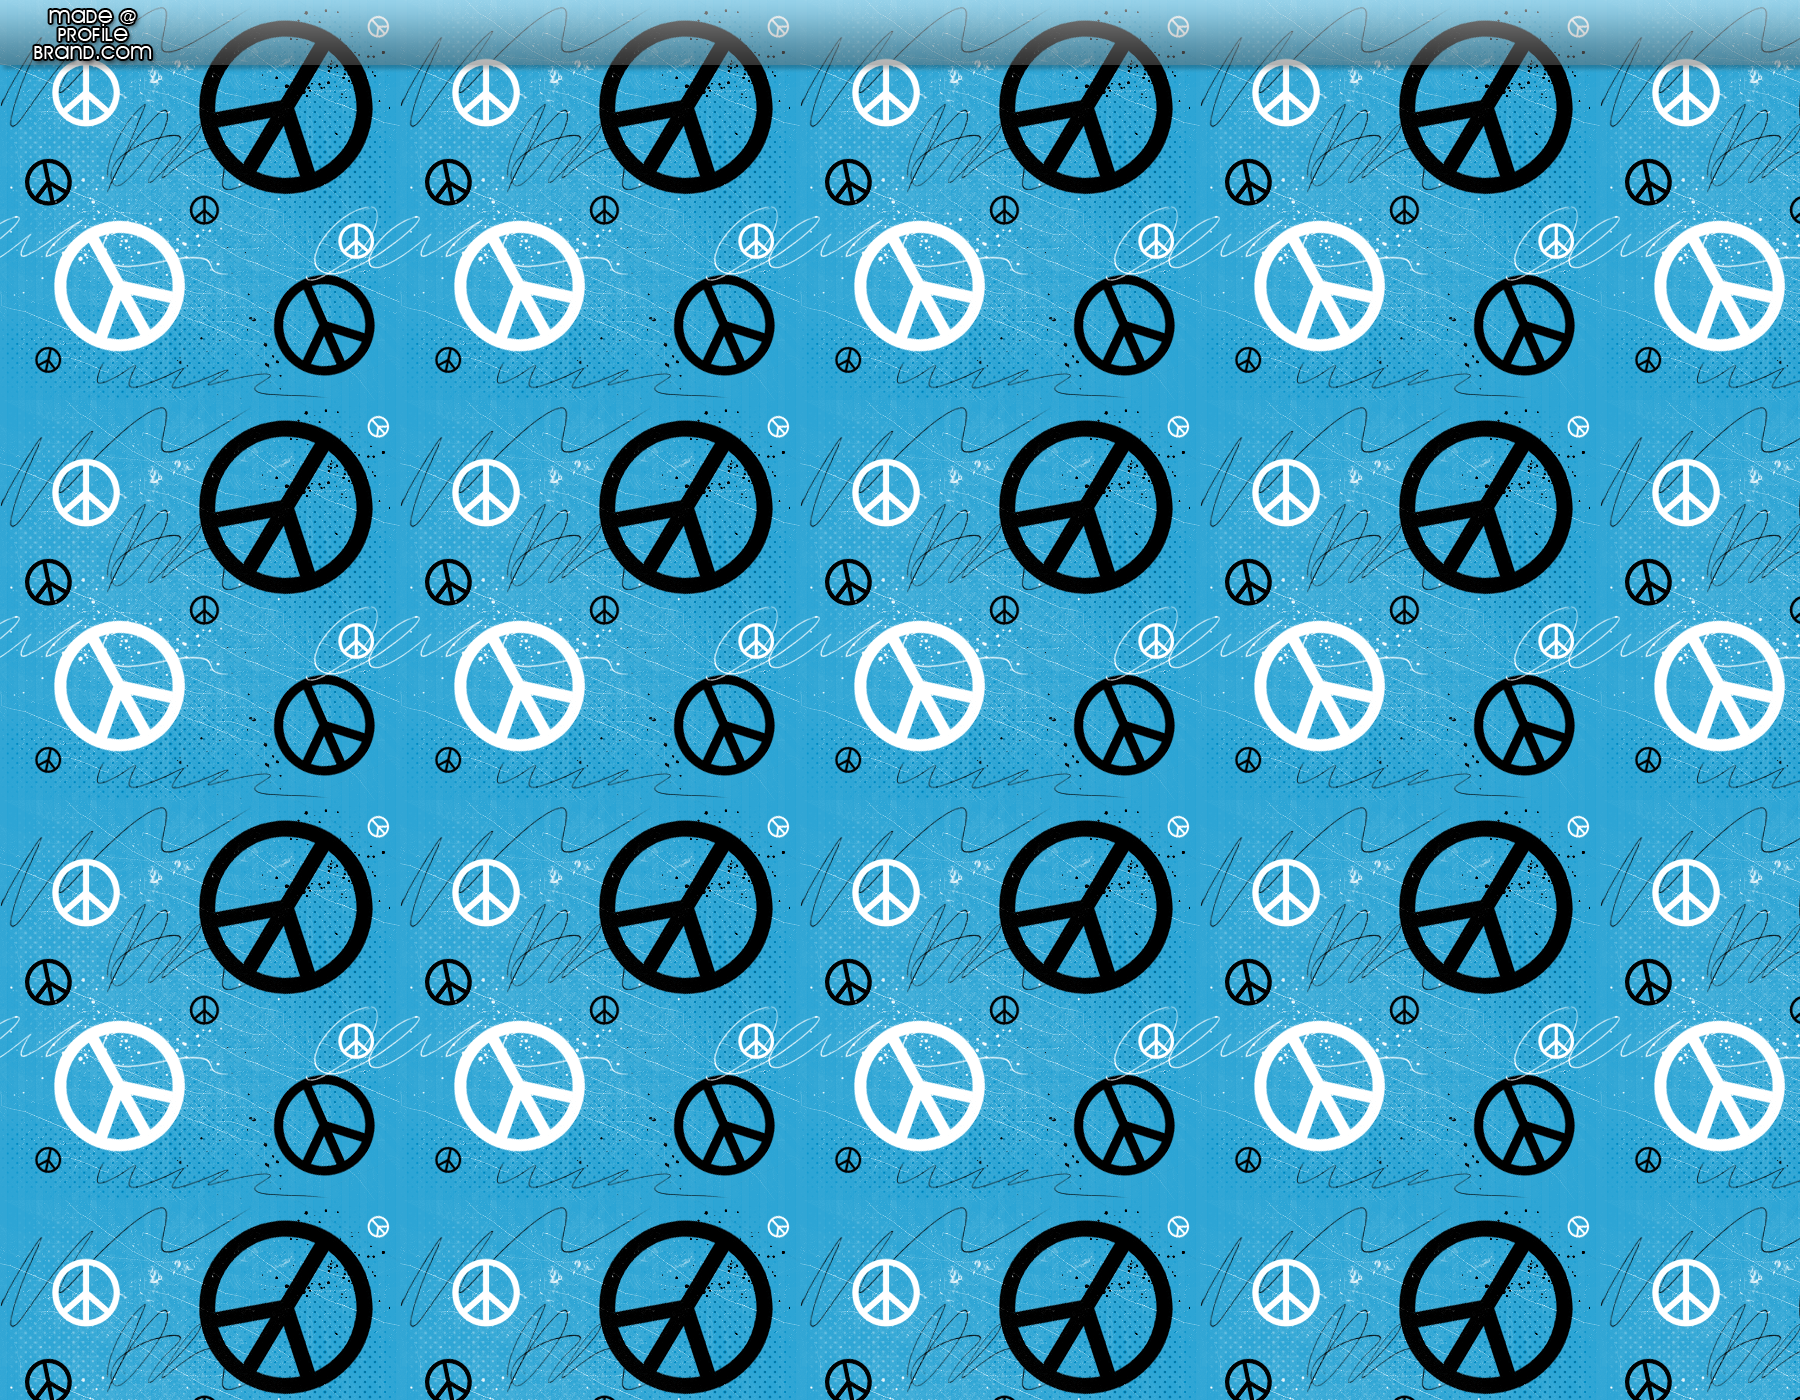 Image Advanced Peace Sign Background Pc Android iPhone And